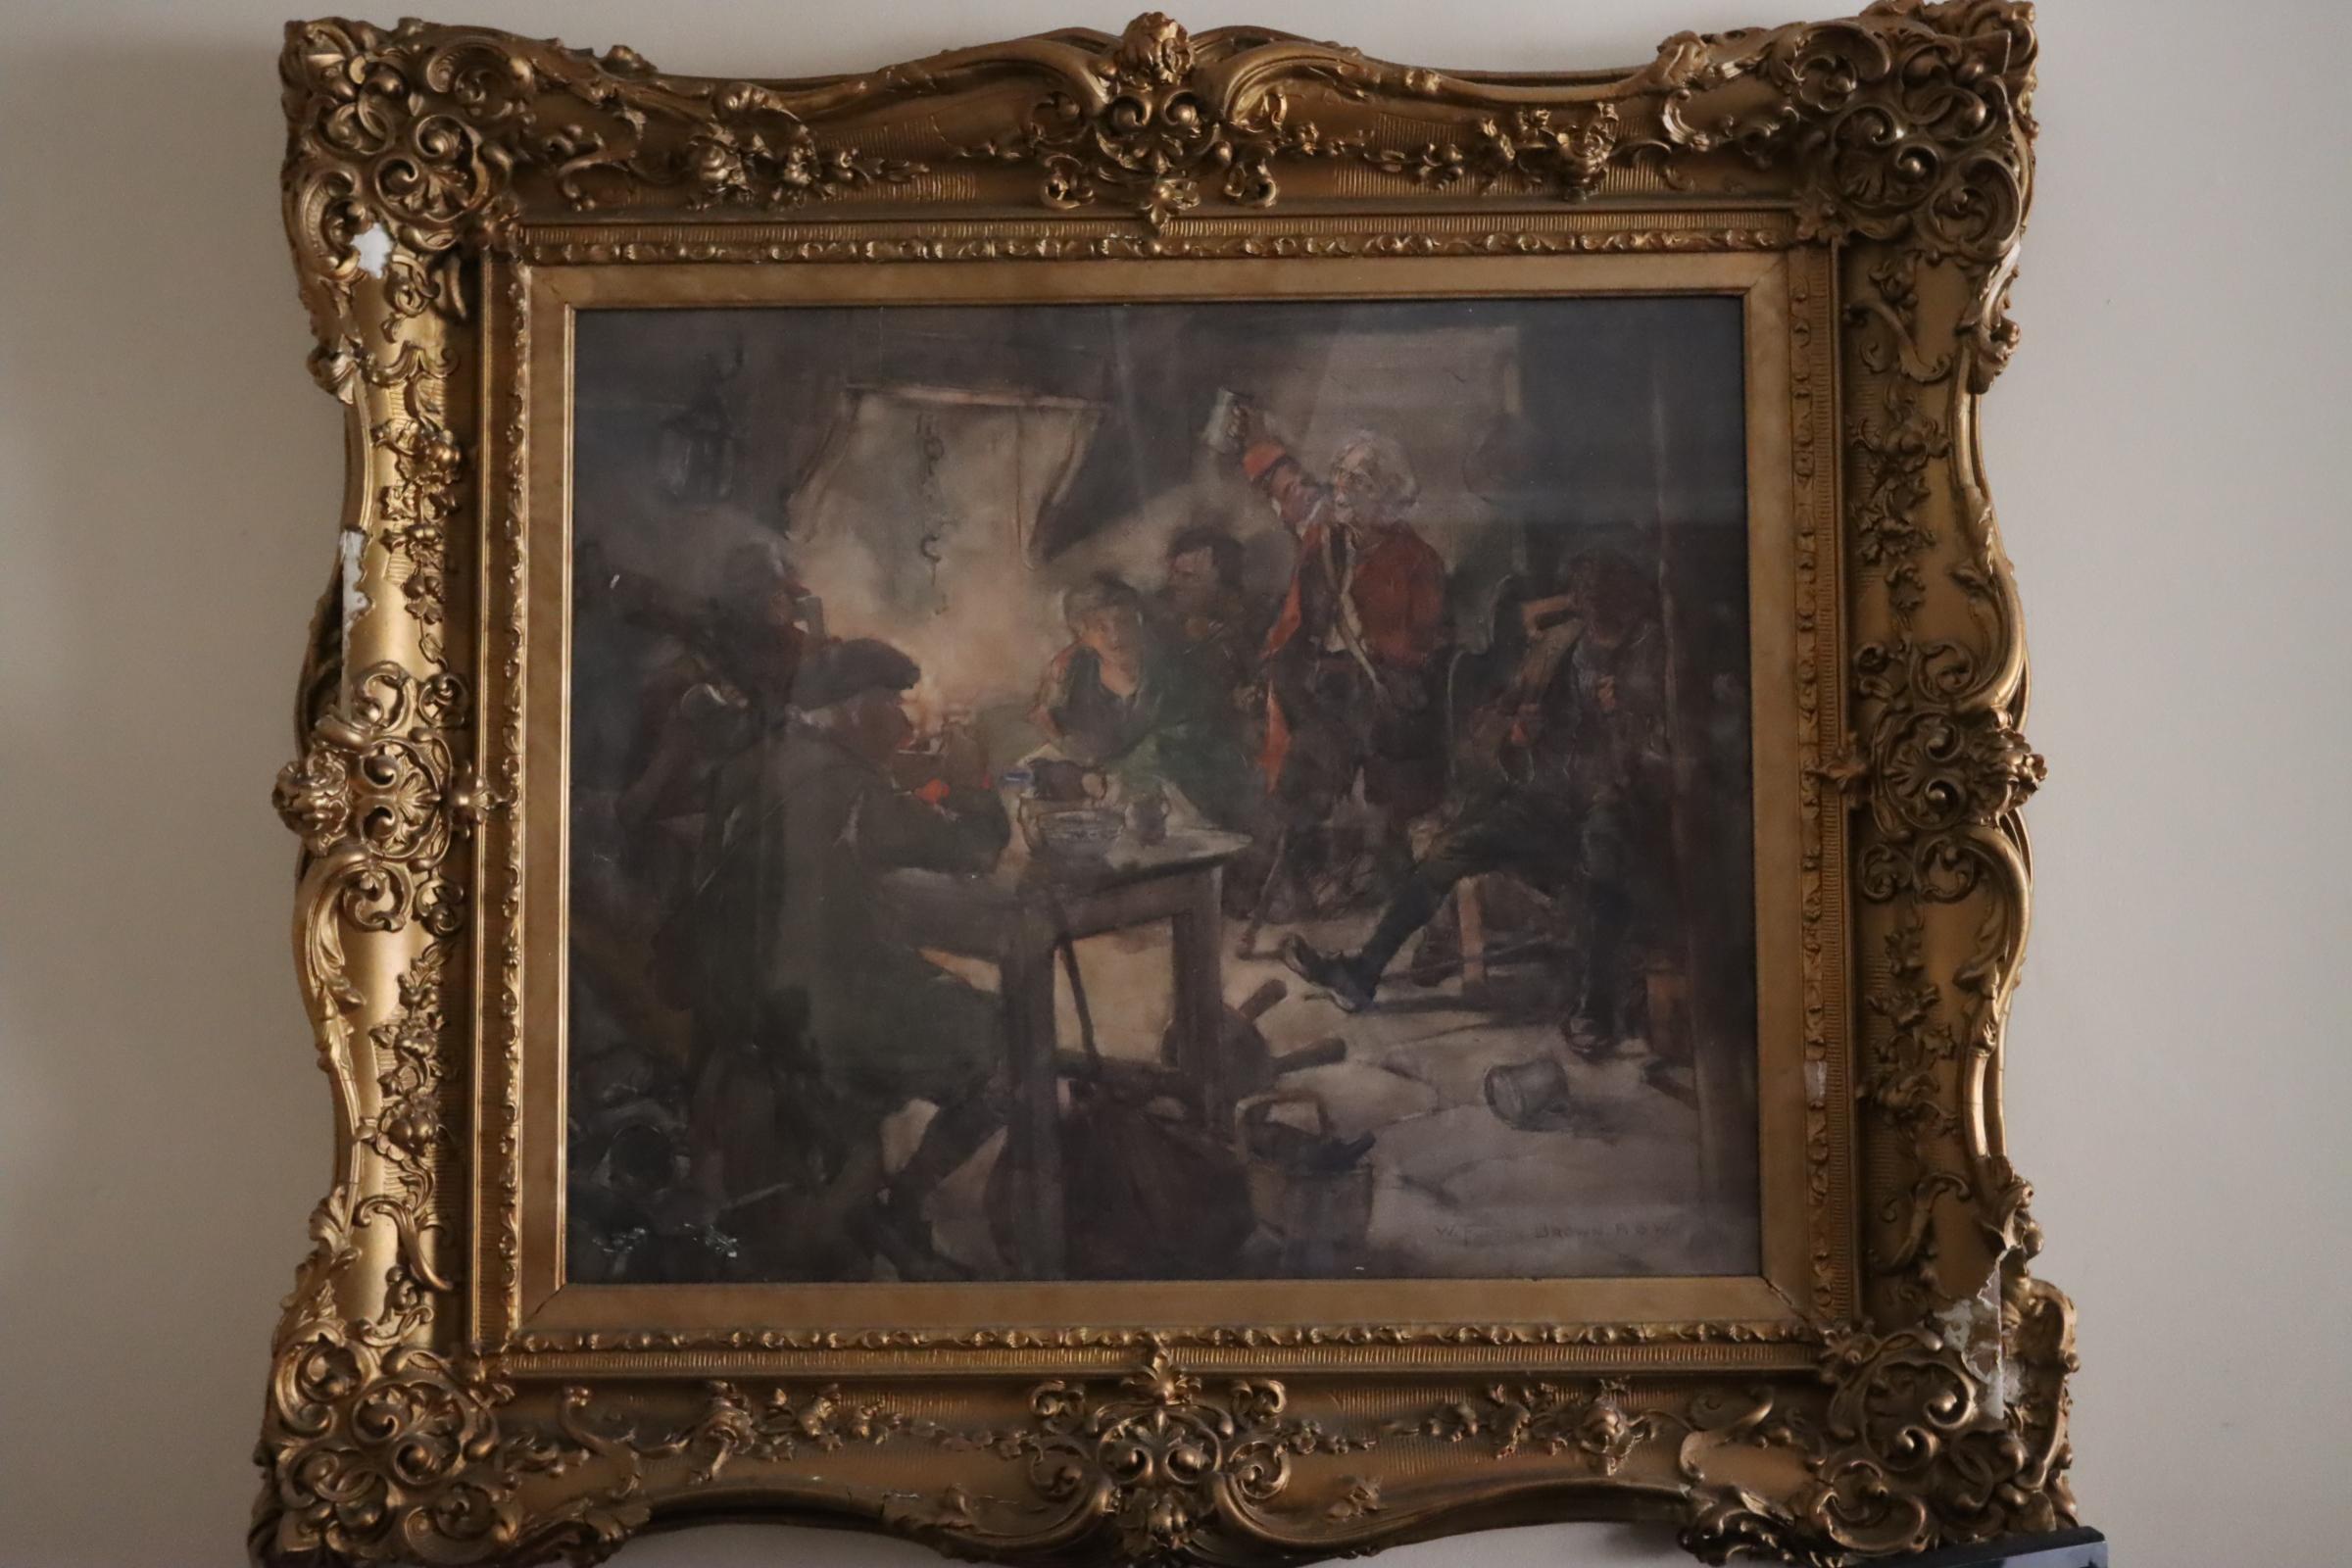 19th Century Genre Scene
William Fulton Brown
Oil on Canvas
Unframed 31 x 21.5 inches
Frame included
Signed
